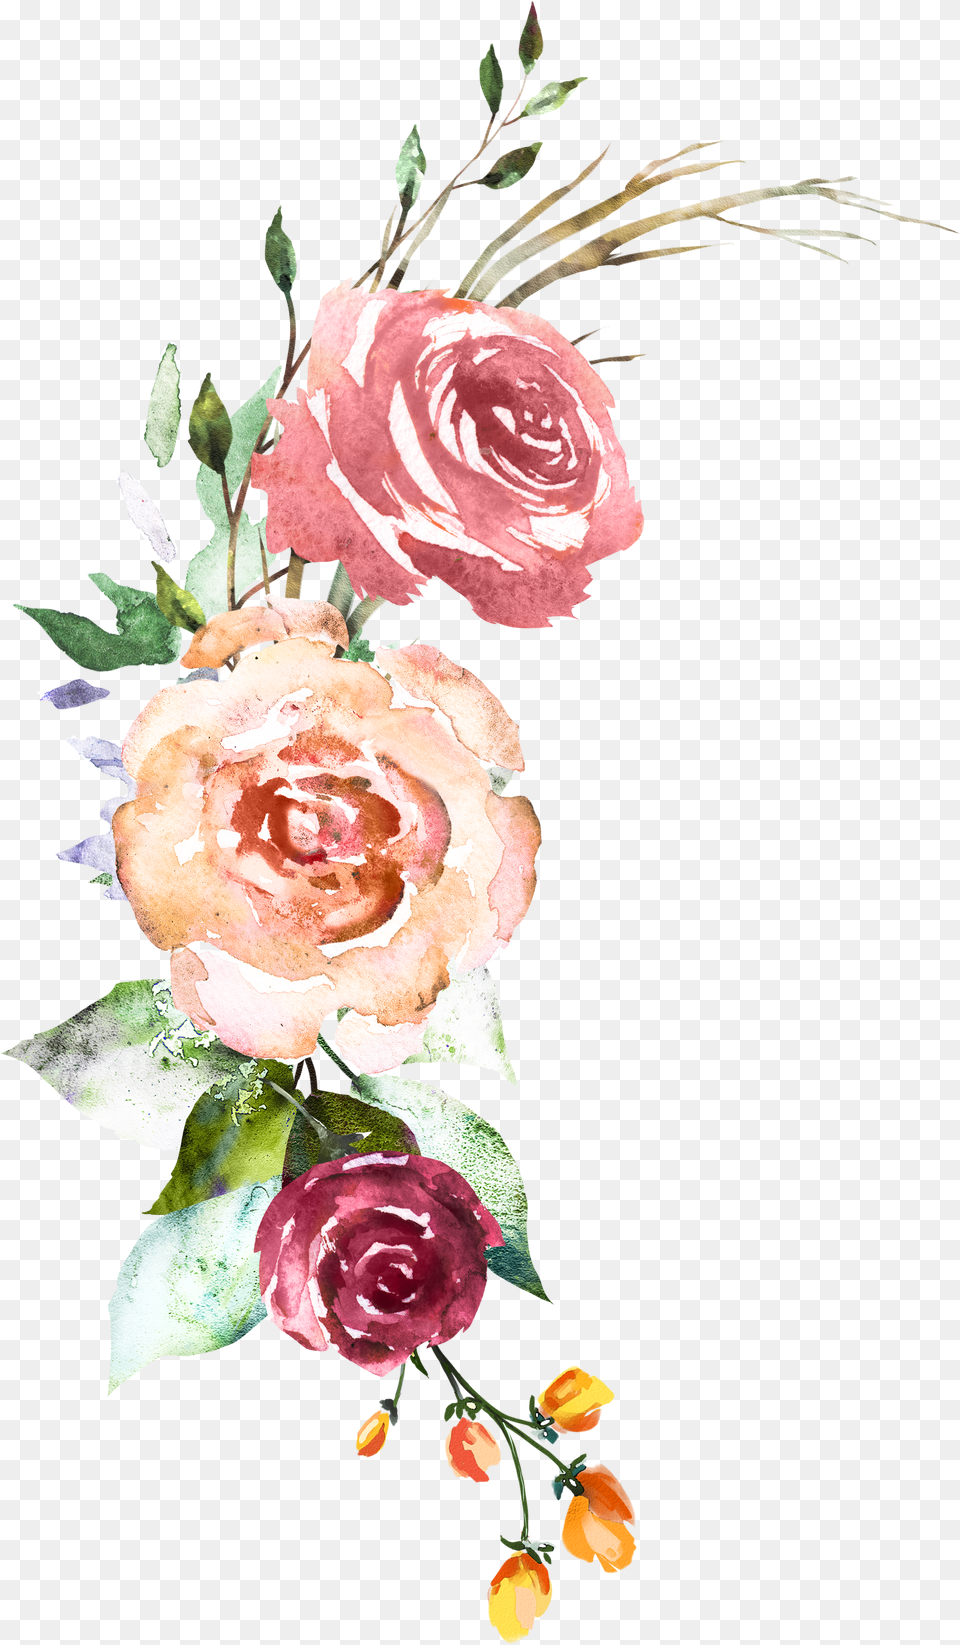 Garden Roses Hd Download Watercolor Painting Png Image